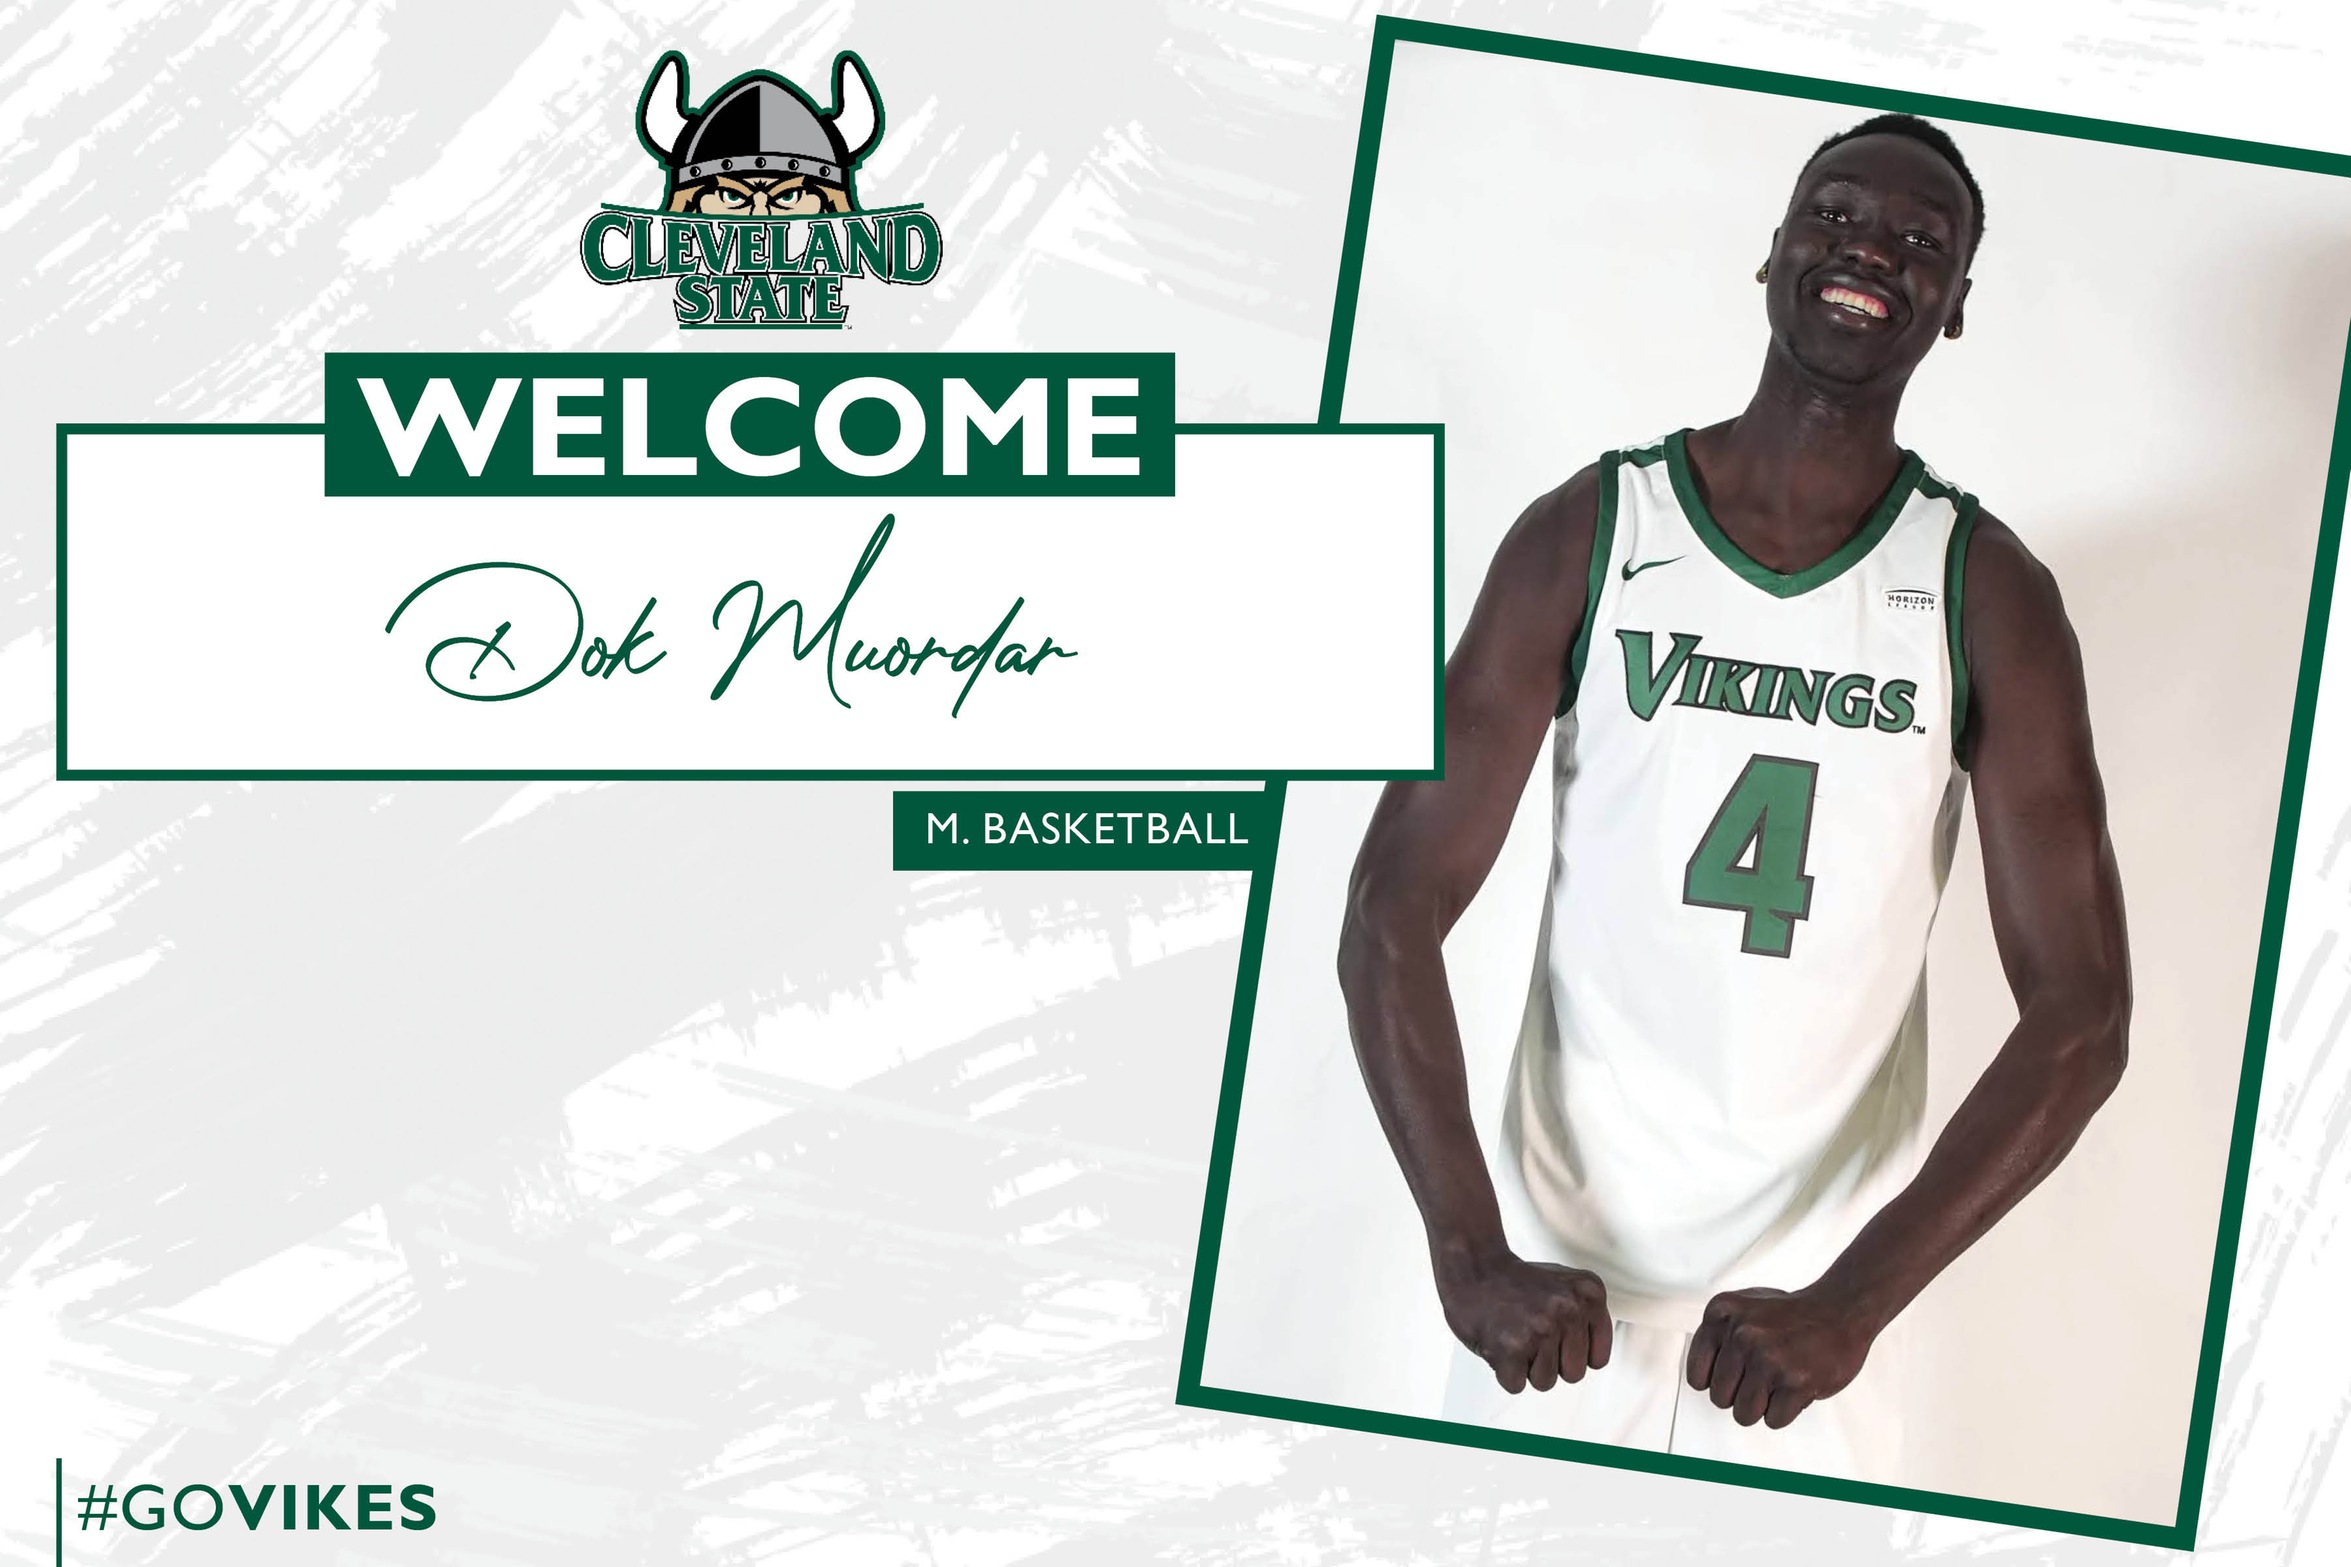 Cleveland State Men’s Basketball Signs Dok Muordar to Letter of Intent